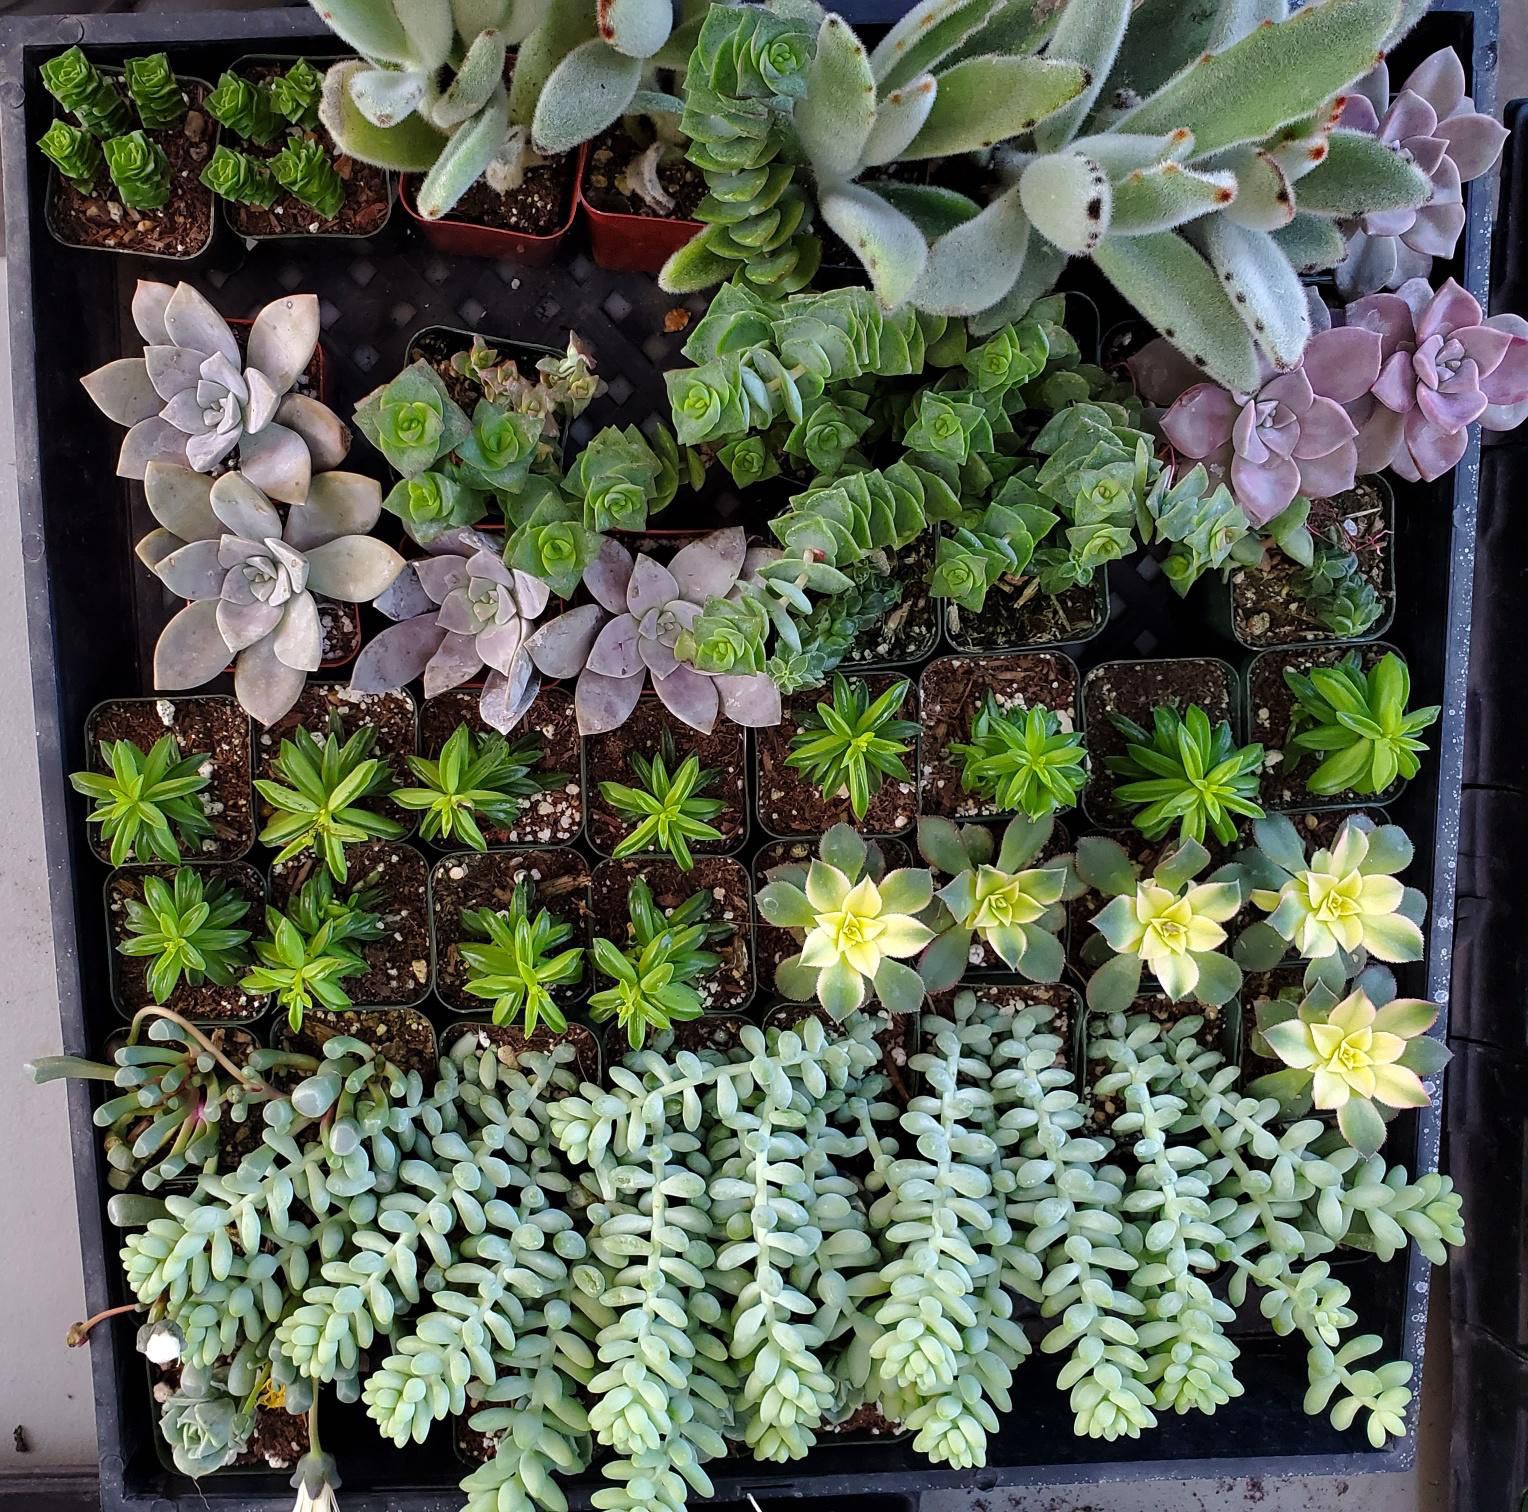 Succulents And Cactus In 2inch Pots For Only $3 Or Buy 10pcs Get 2pcs Free